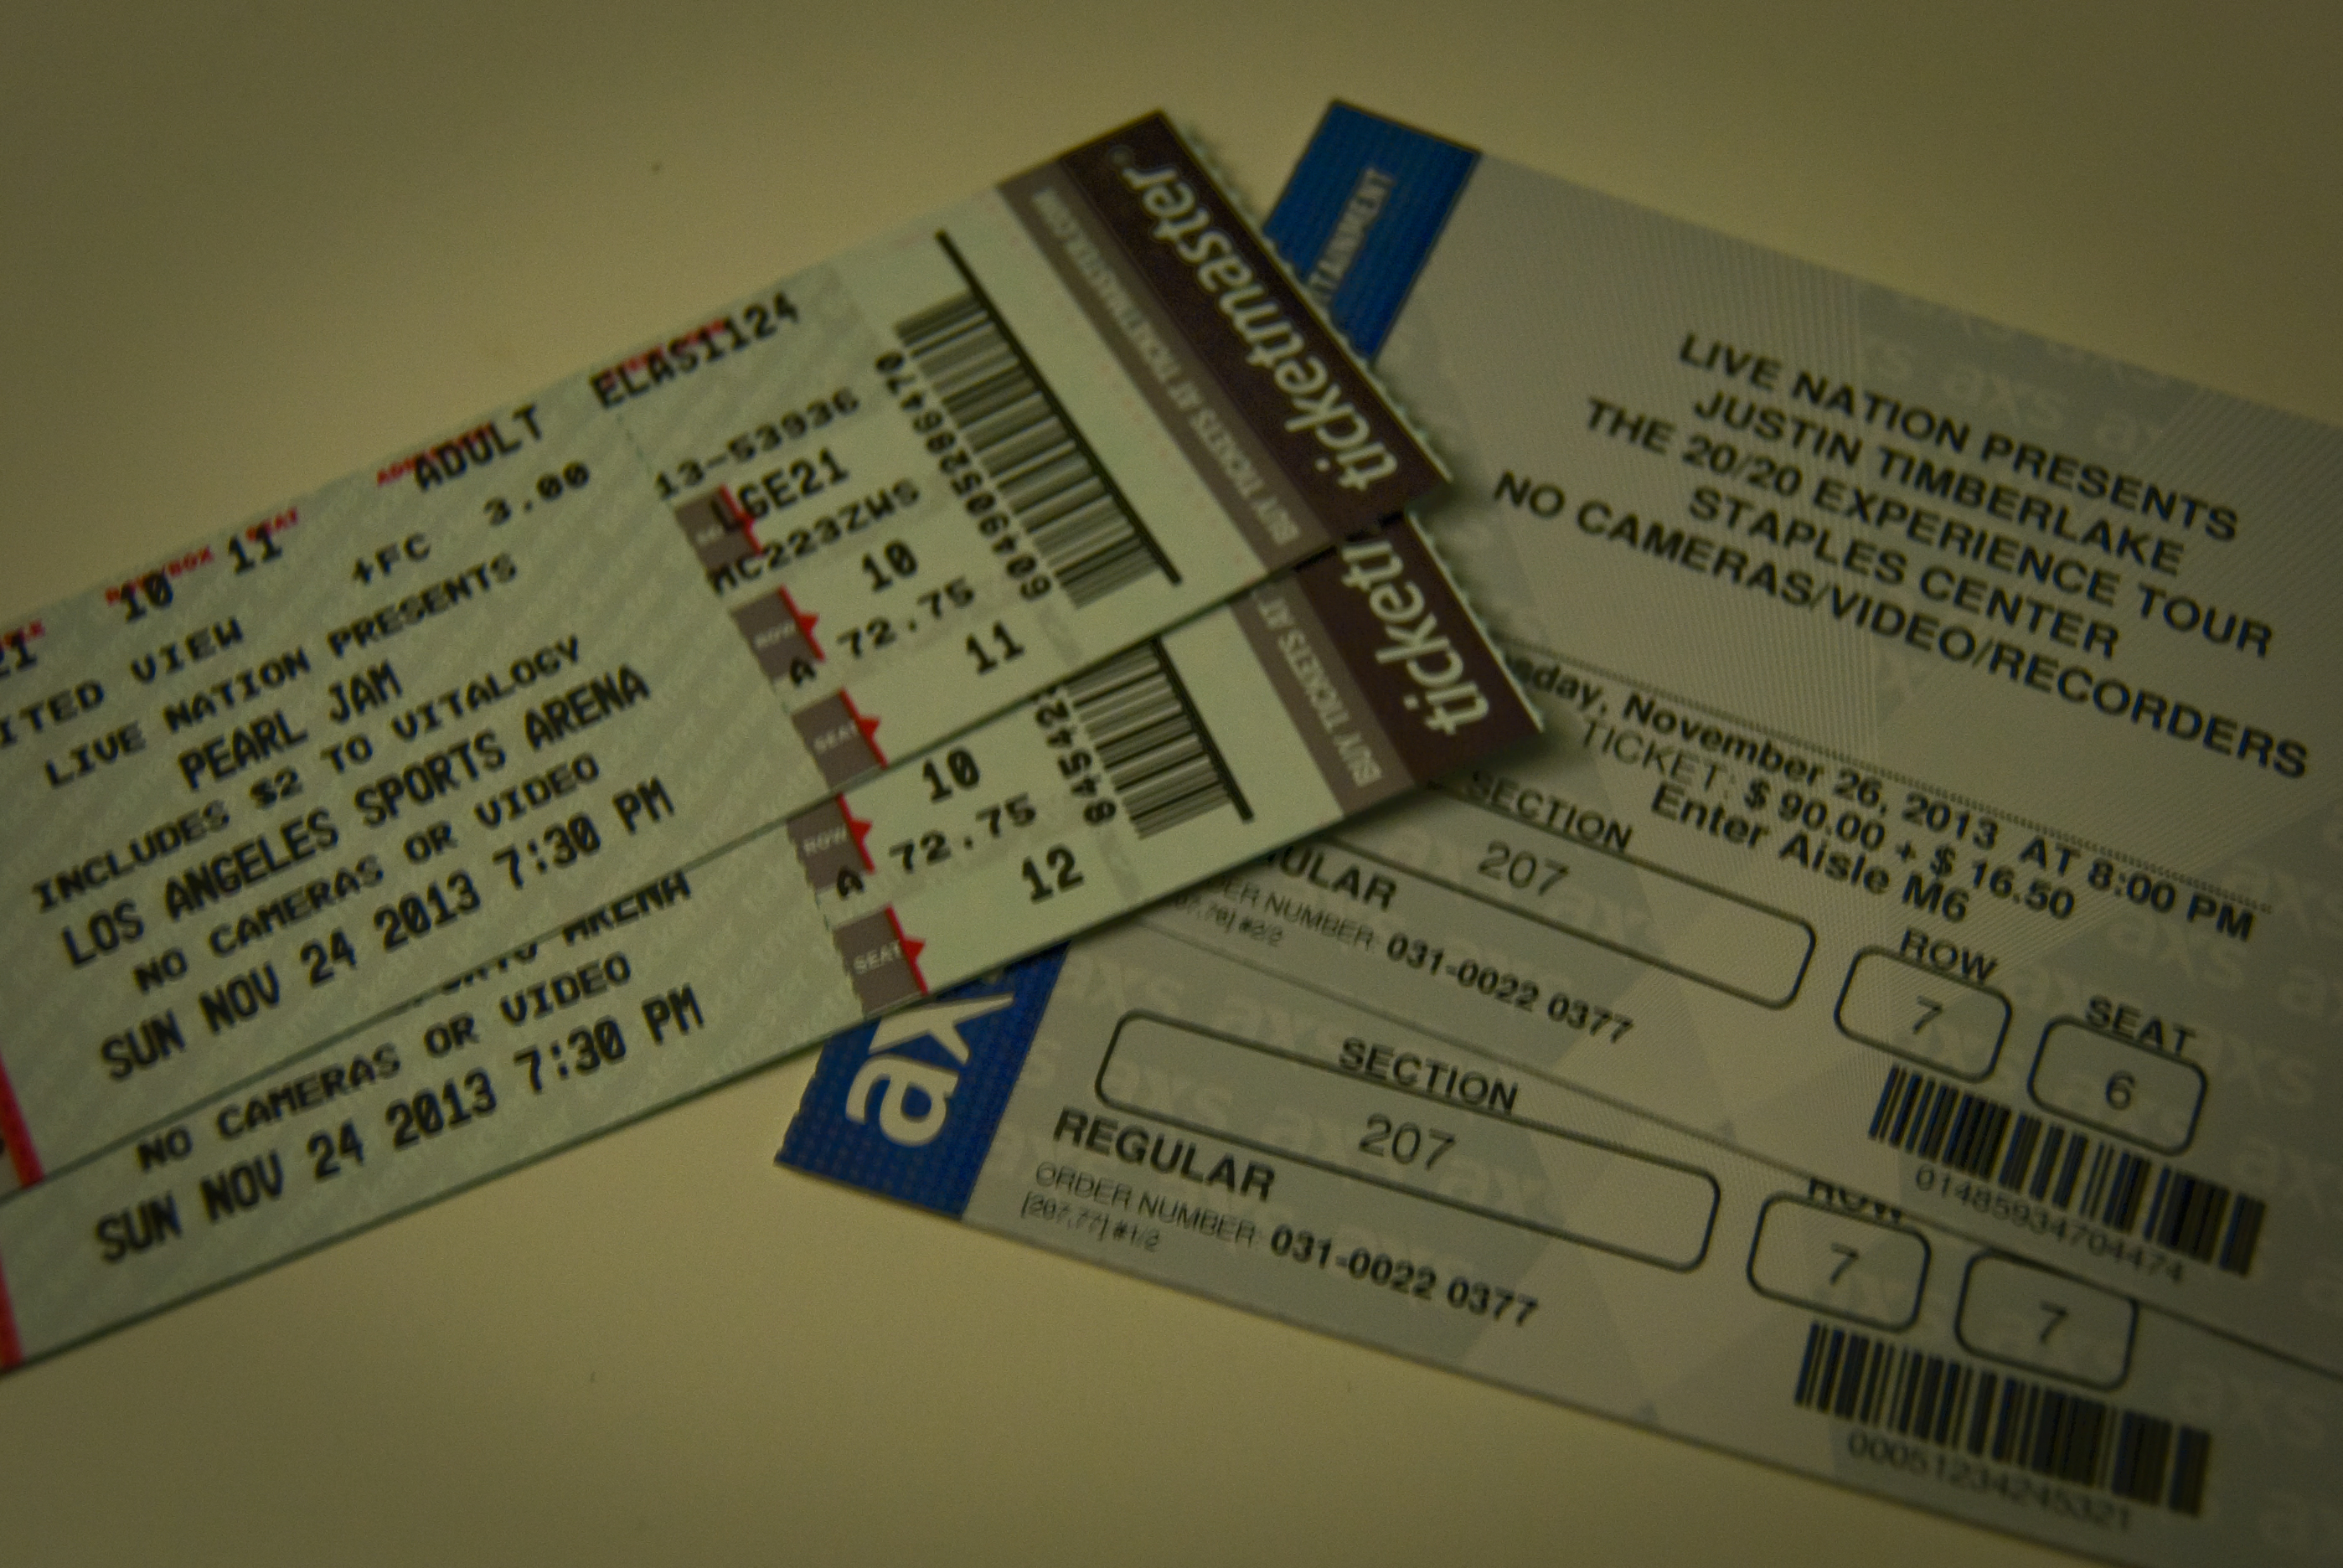 7-AUG-2013: Crazy concert ticket mail delivery today. Shows 2 days apart, 3-plus months away.